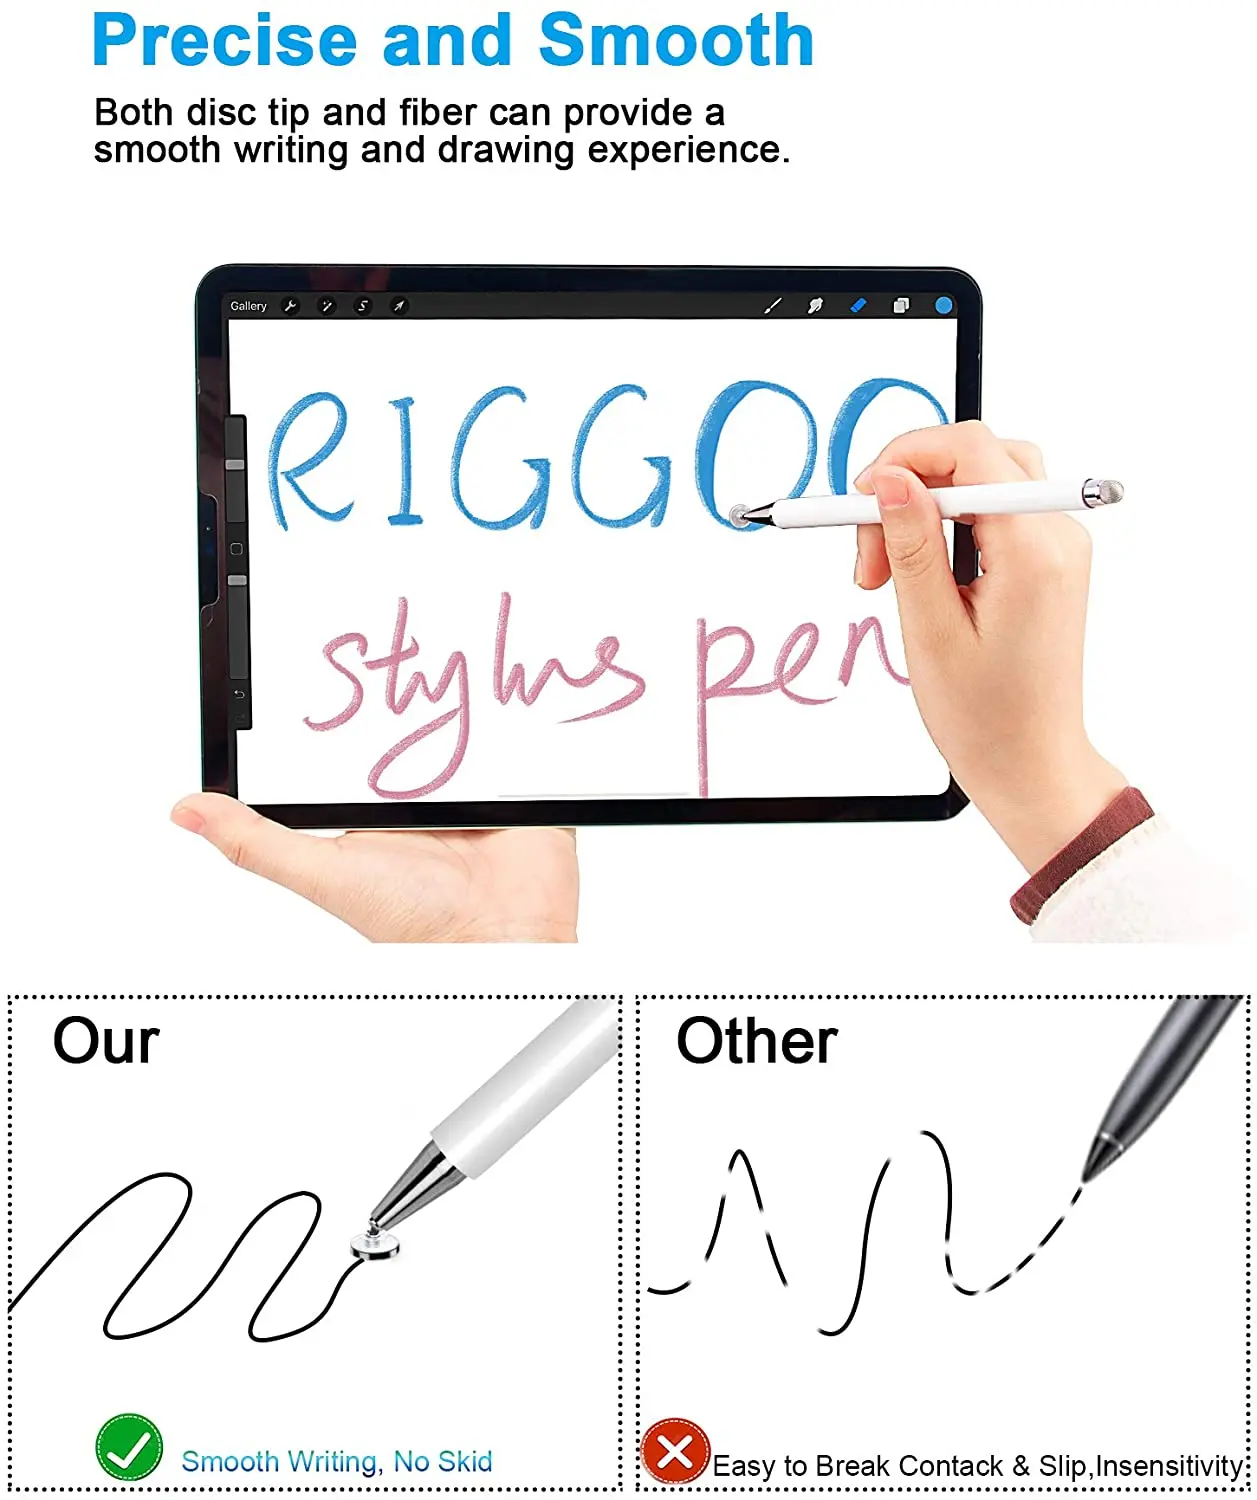 

Active Stylus Digital Pen for Touch Screens,Compatible for iPhone 6/7/8/X/Xr/11/12 iPad Android Samsung Phone &Tablets, for Draw